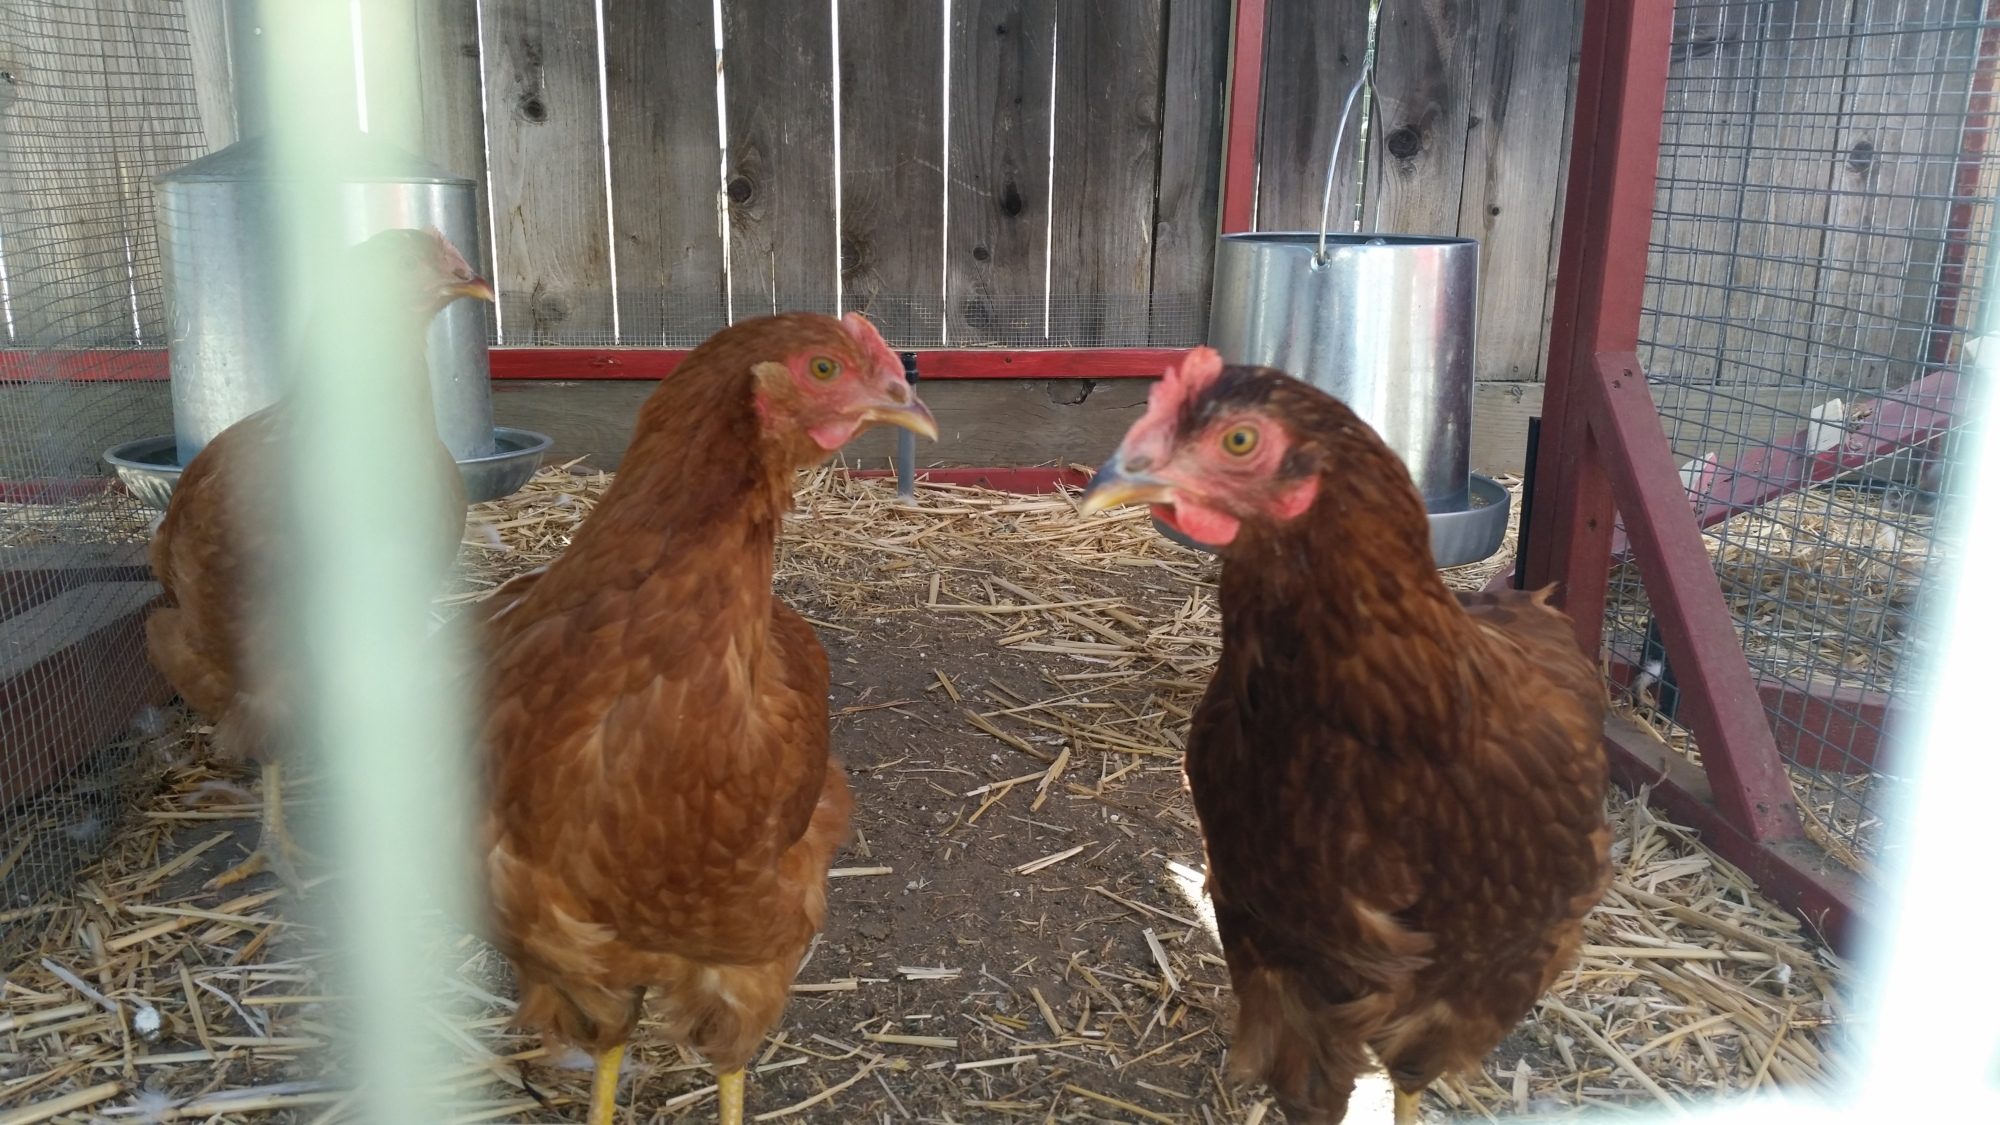 my  New Hampshire on the right her name is old red the New Hampshire on the last her name is Flower..
they both are 5 months 1 day I don't know if they're ready to lay or not I've been reading up on info about chicken since I'm new at this any information would help thanks by the way we're sticking up for resting areas for him this weekend